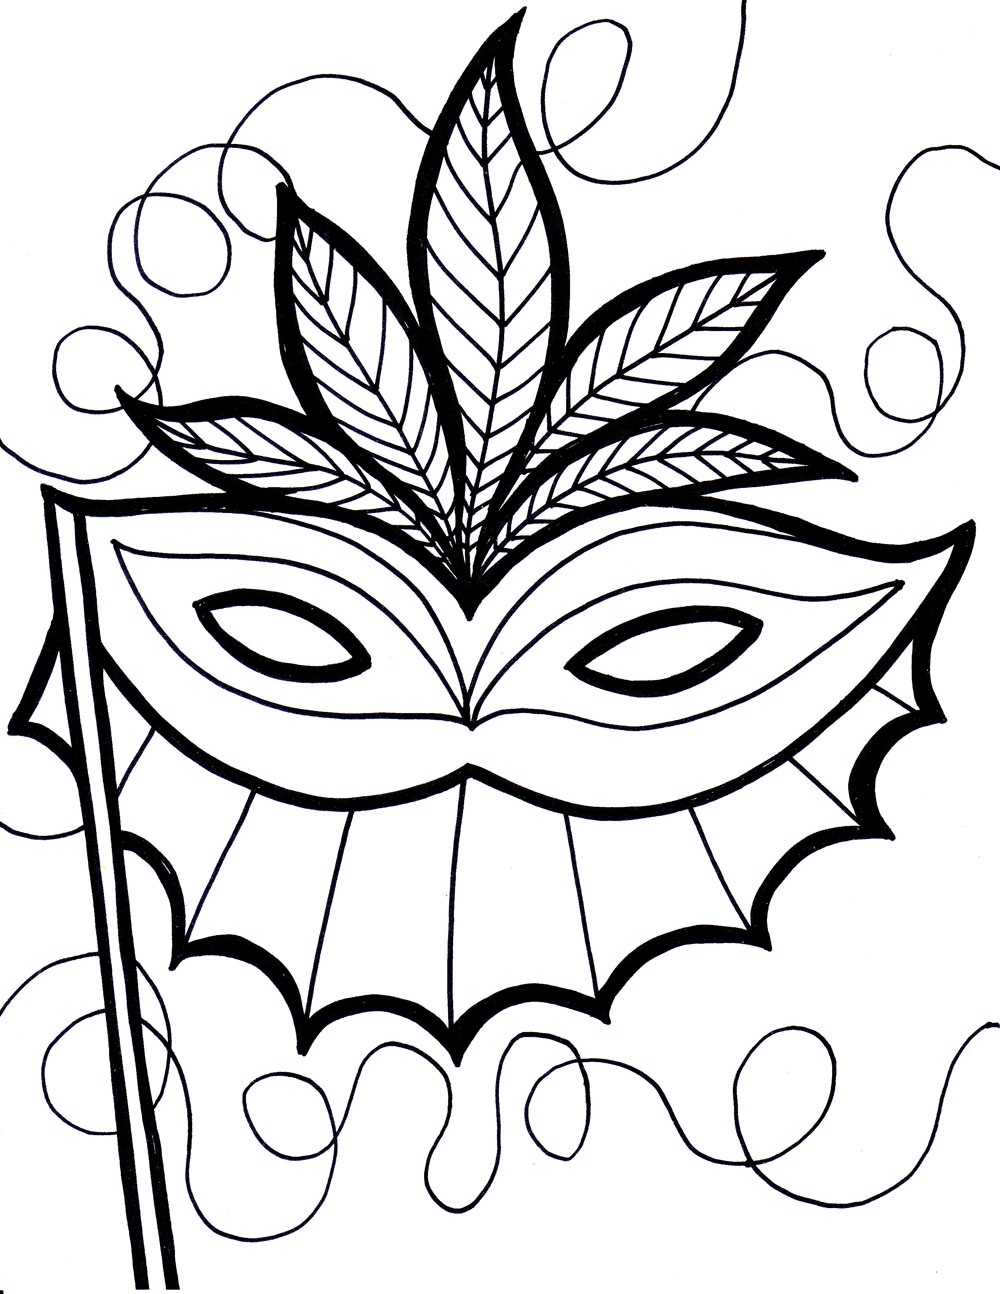 Carnival Mask Coloring Page